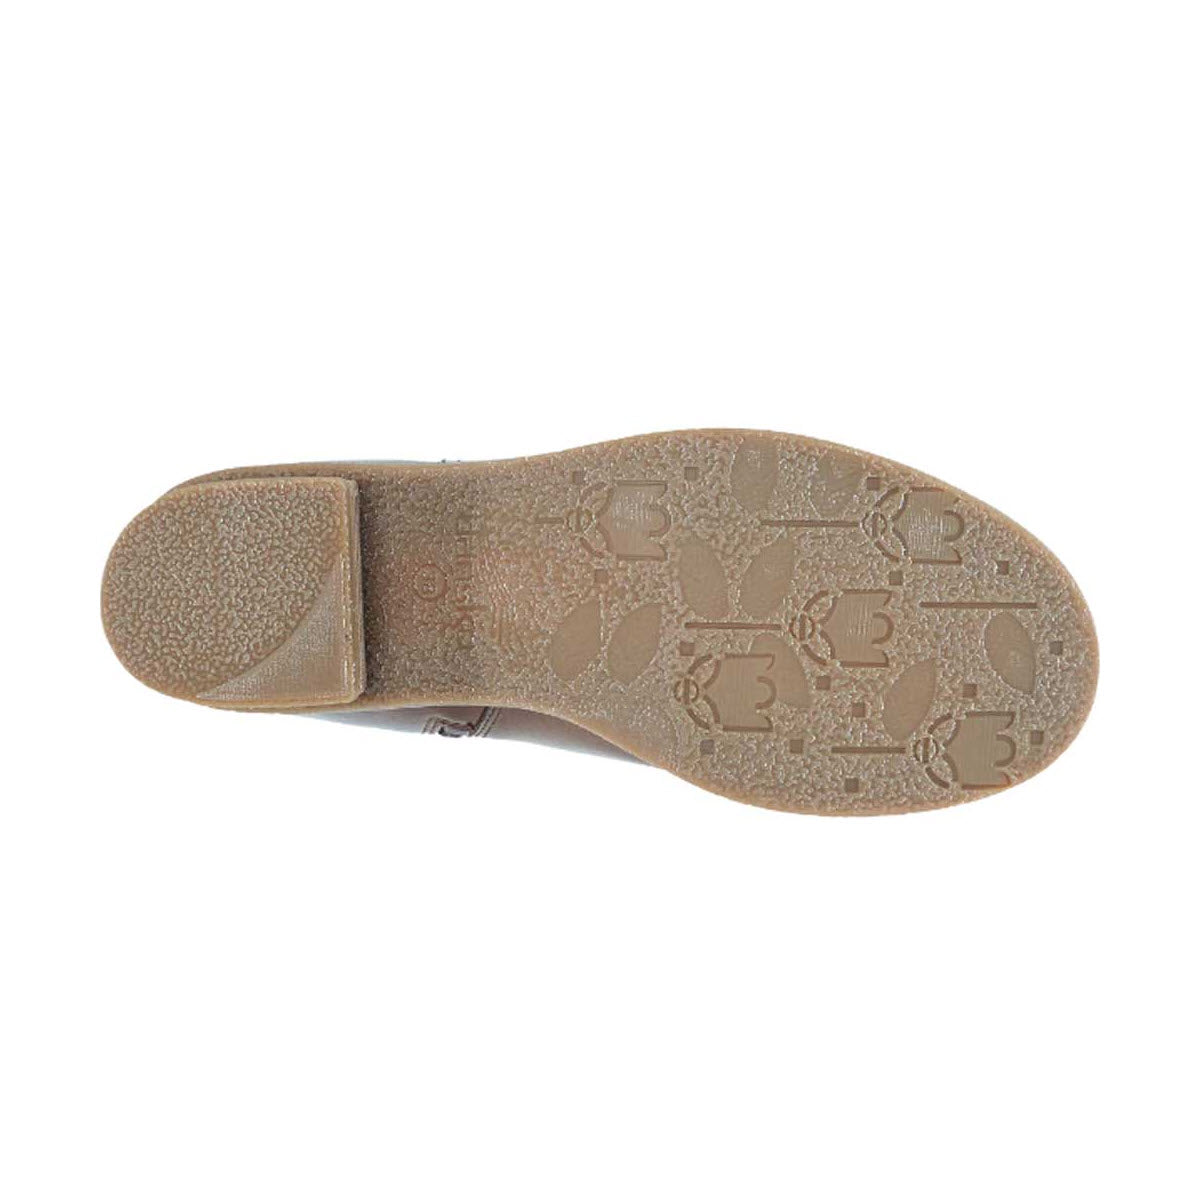 Bottom view of a waterproof Dansko Chelsea boot showcasing its textured sole patterned with various symbols.